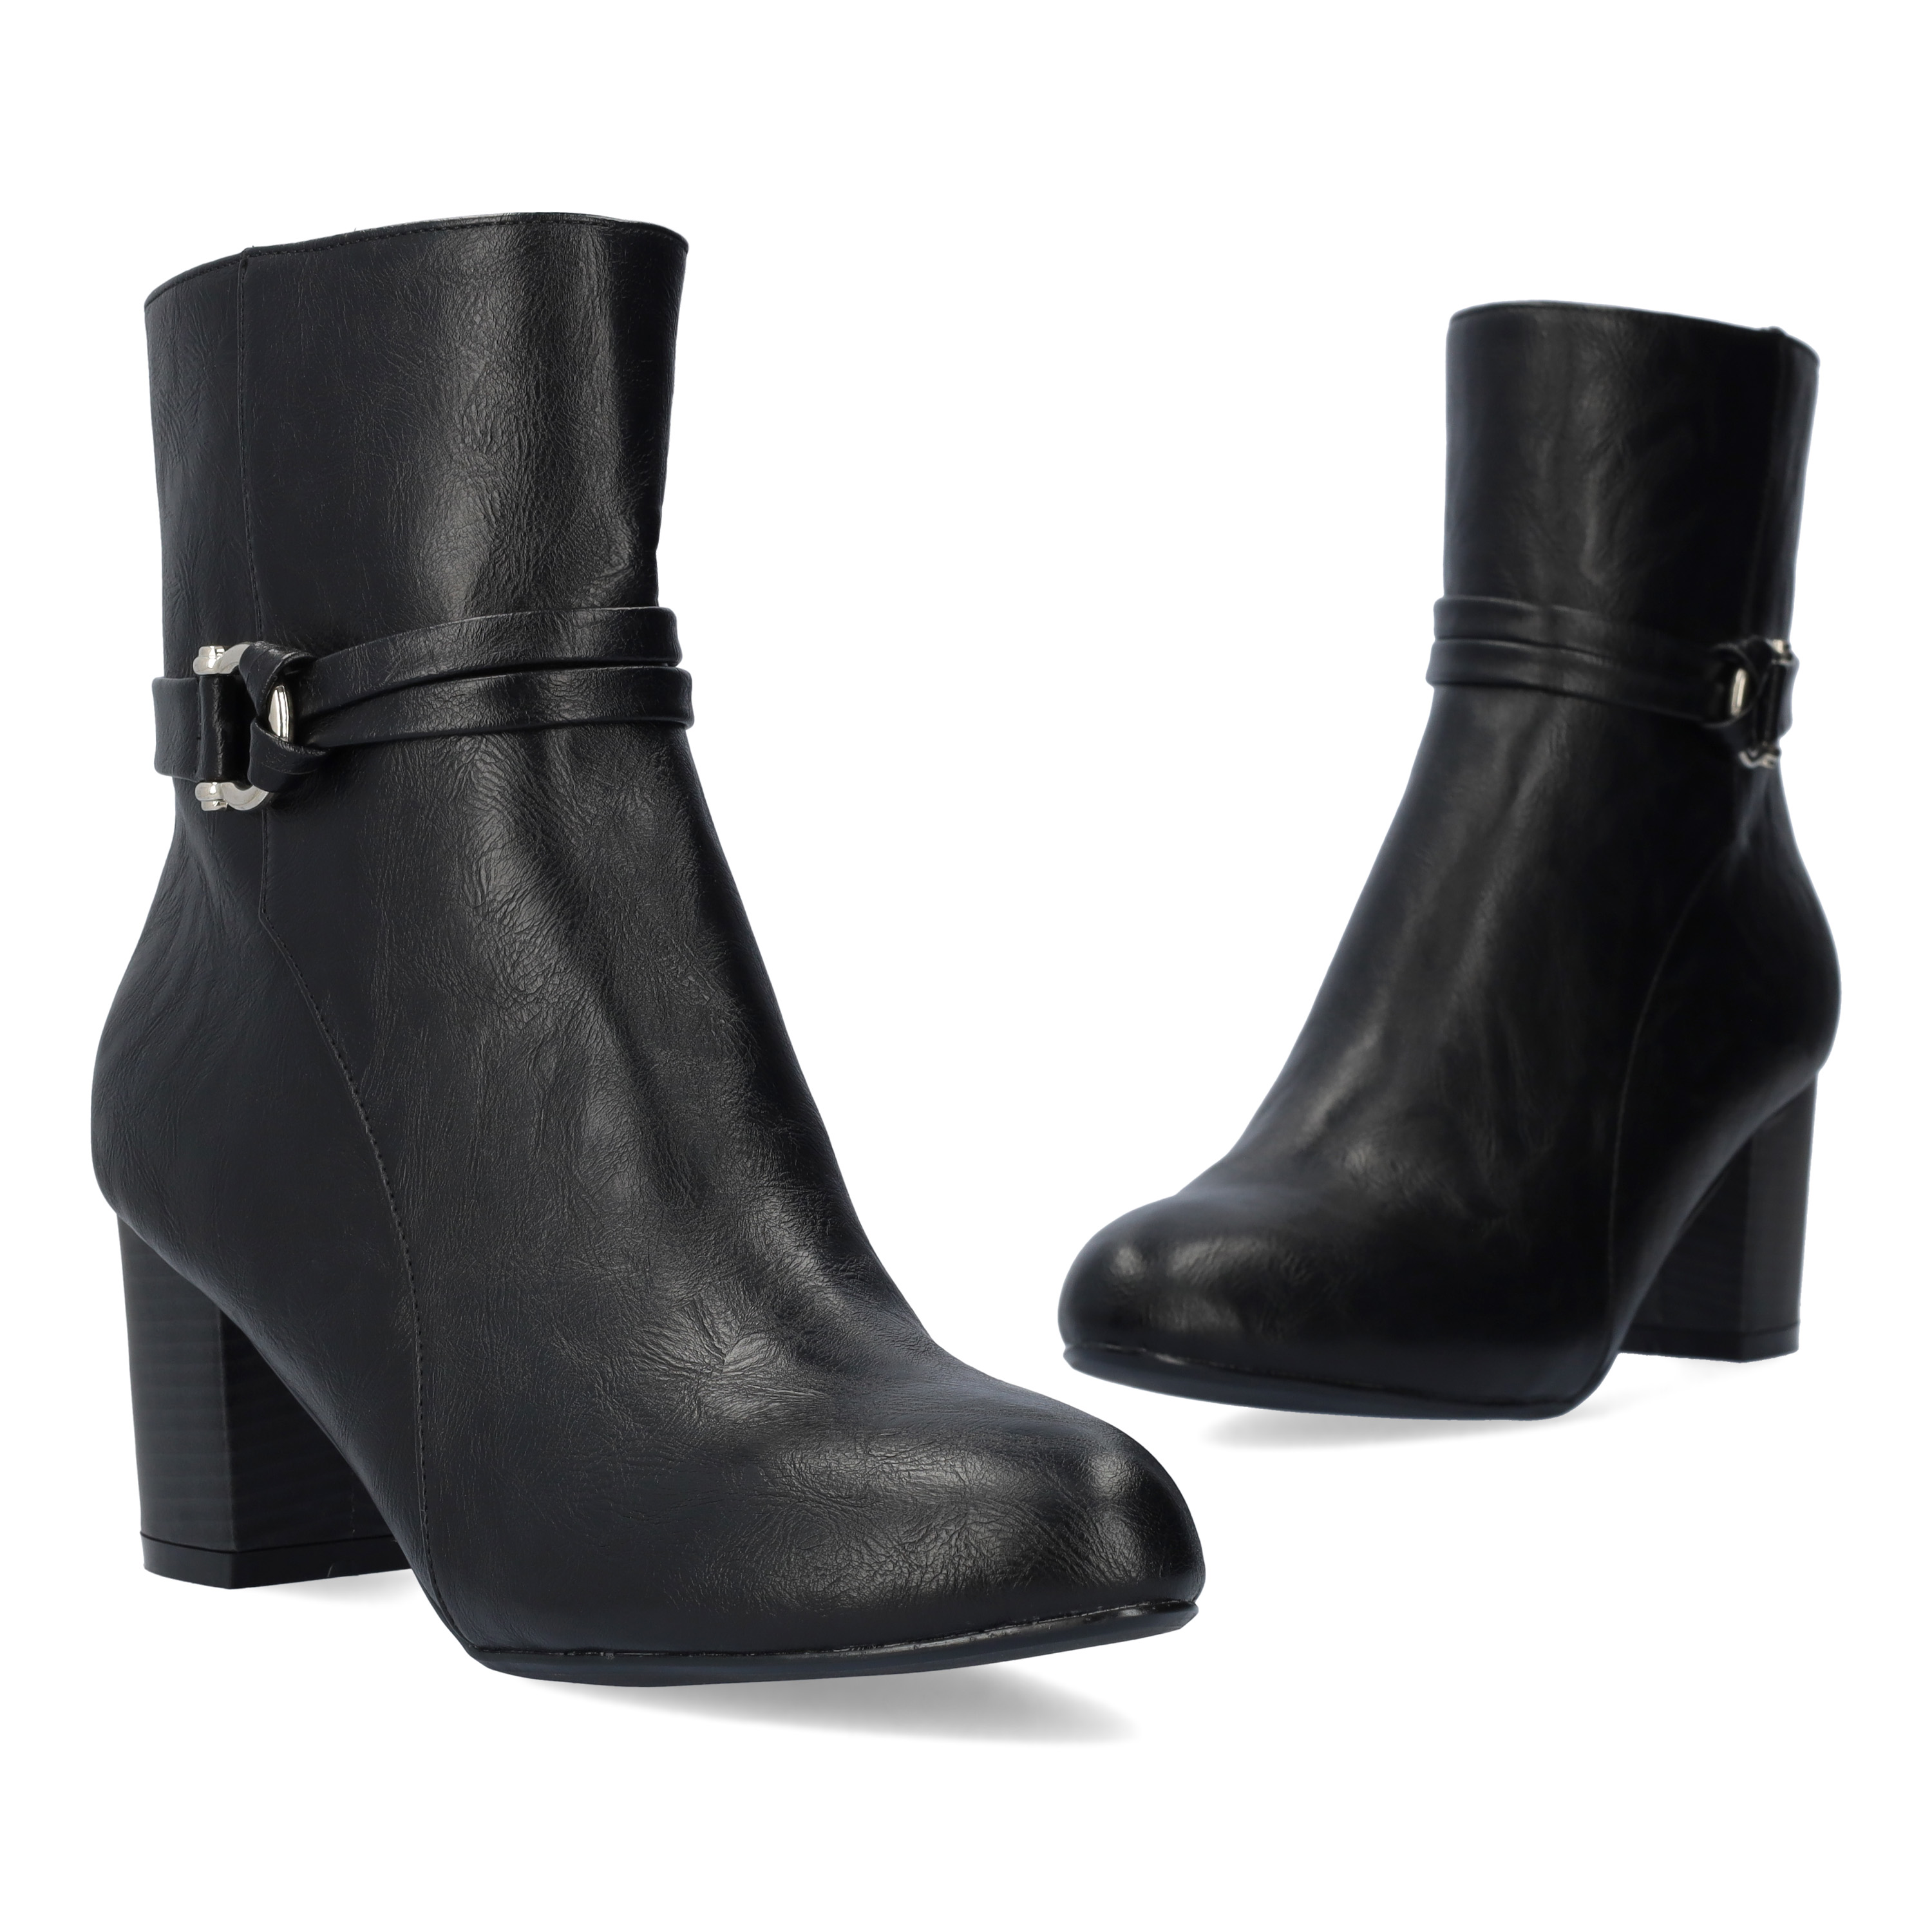 Black faux leather booties. 